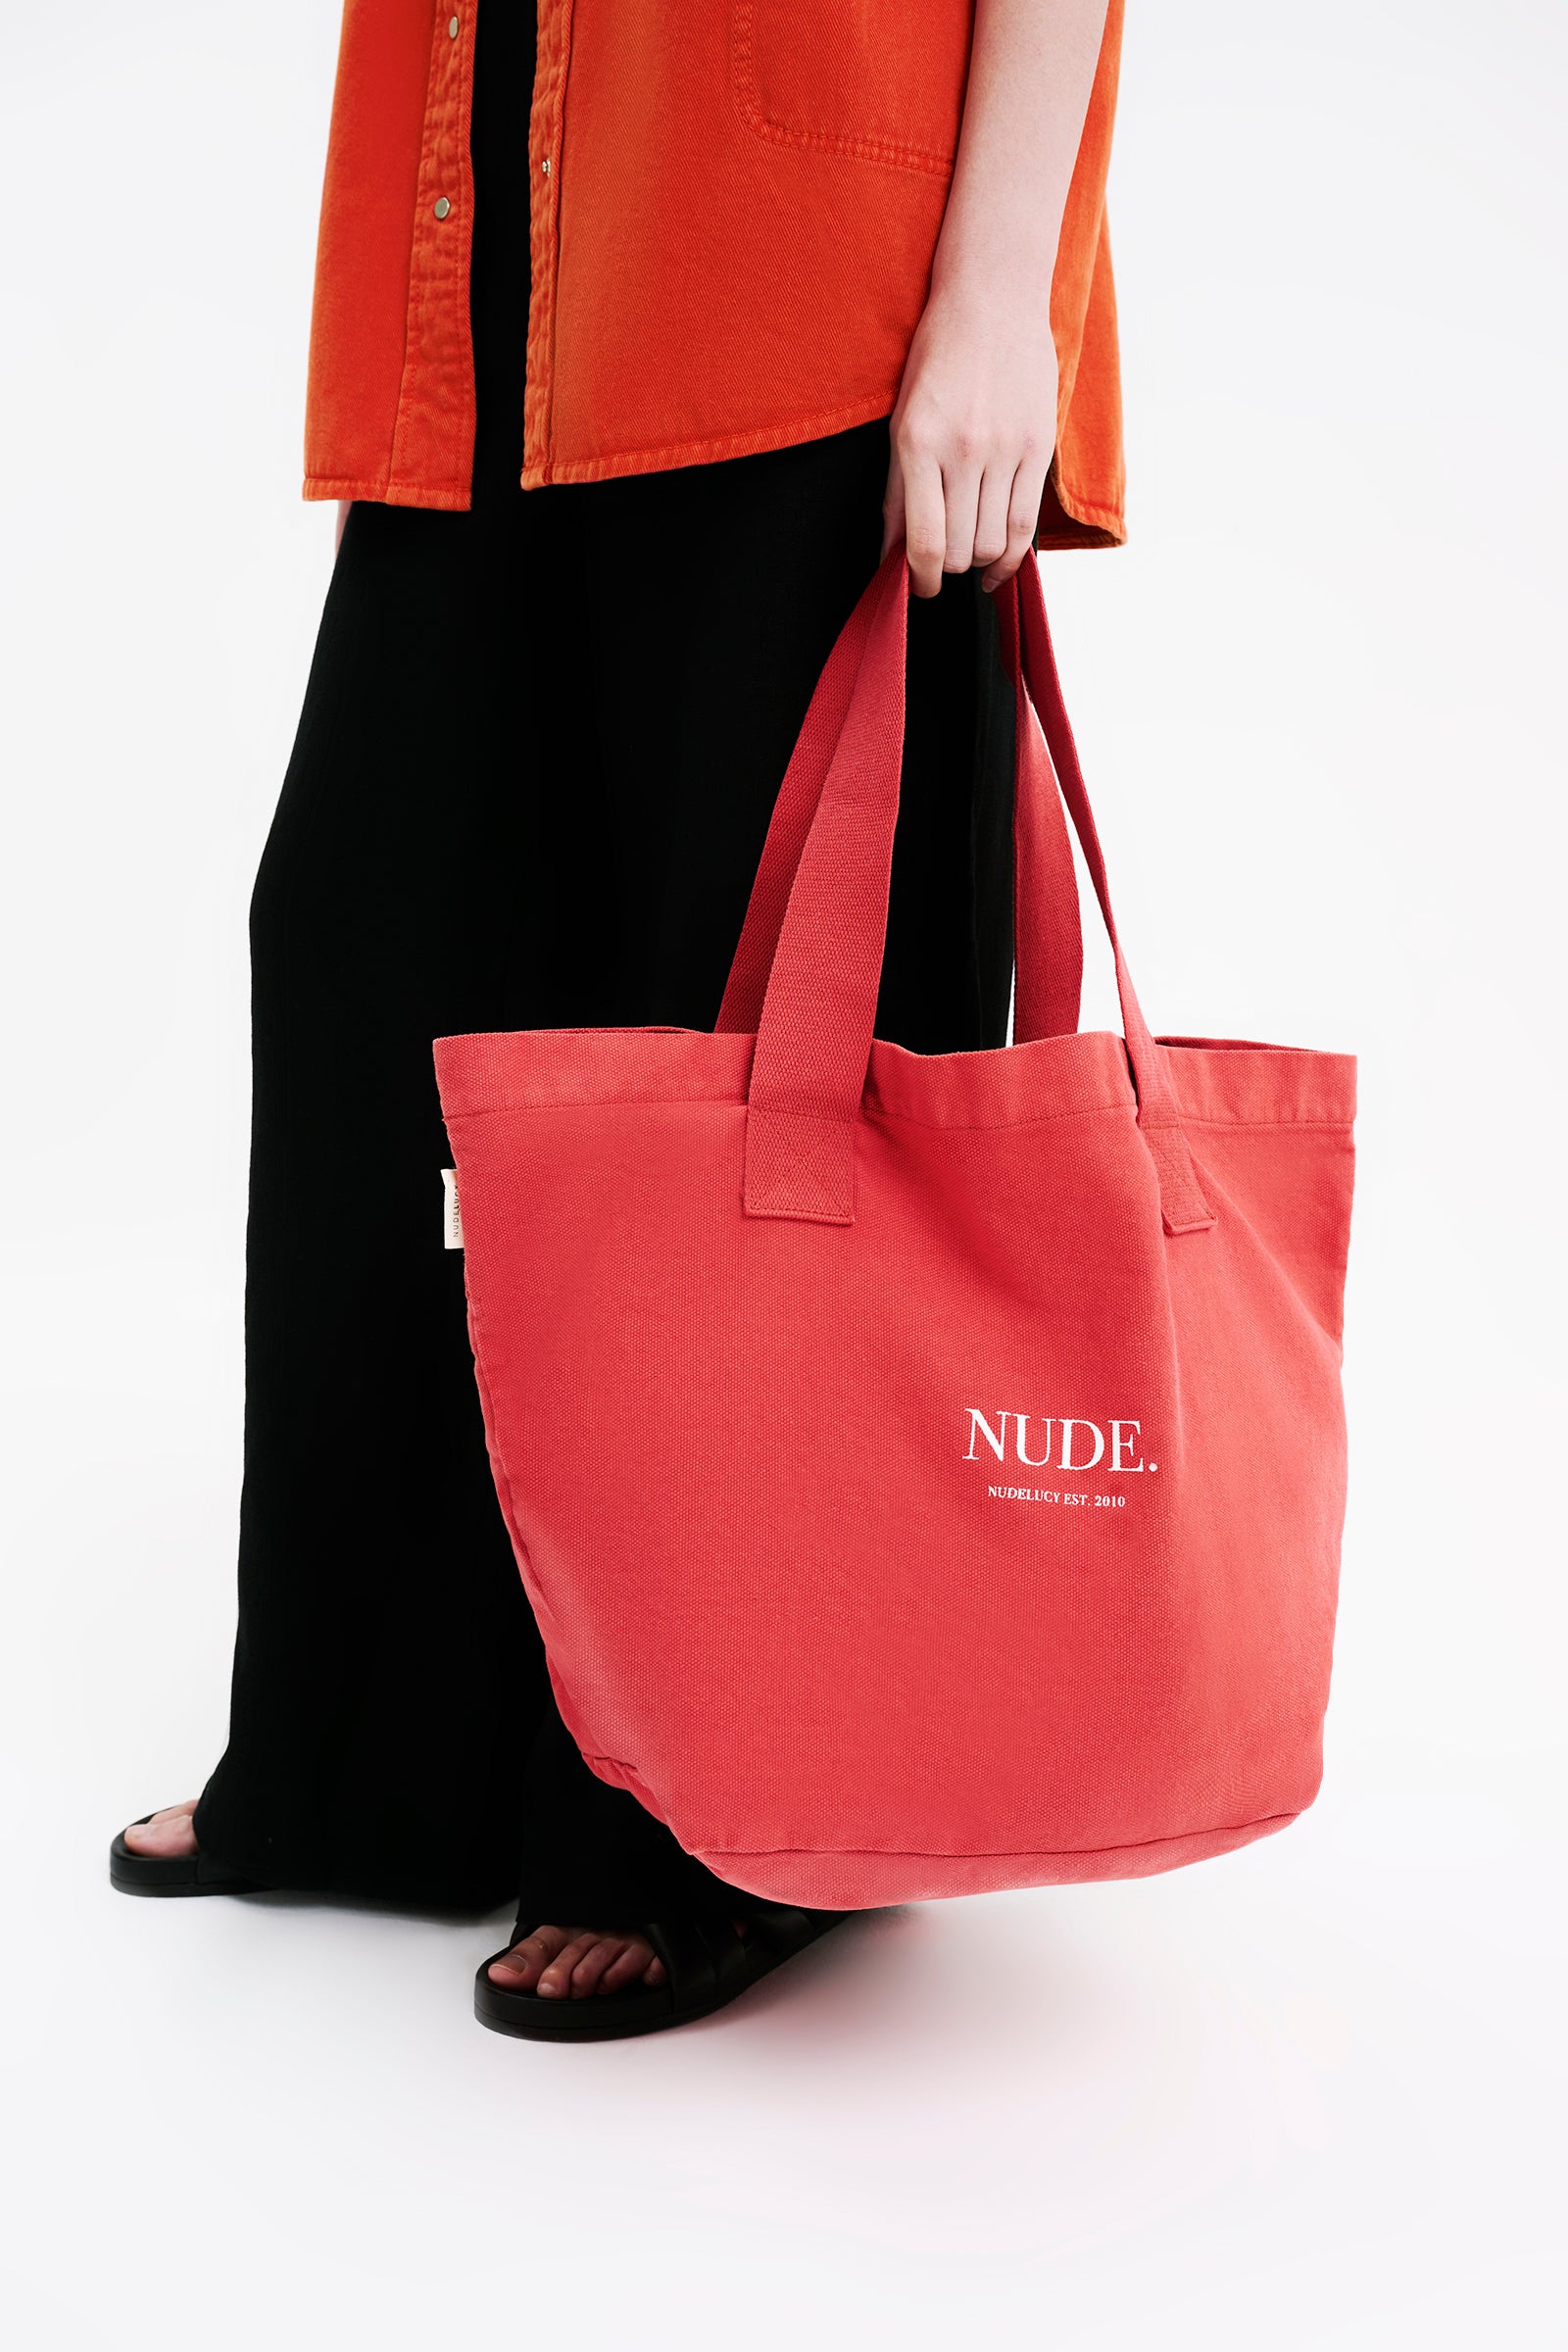 Nude Lucy Nude Tote Bag in a Pink & Orange Toned Coral Colour